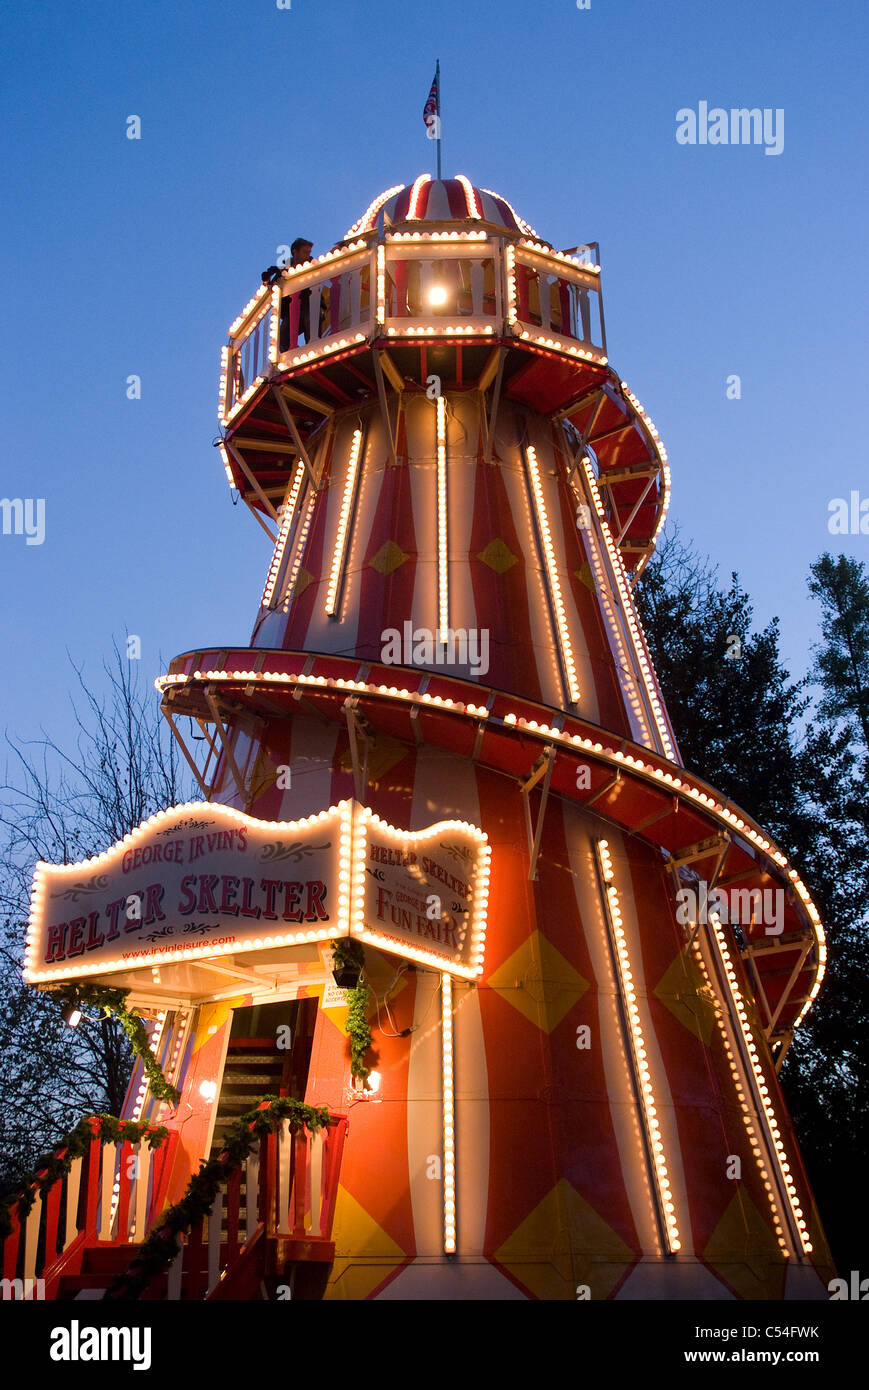 Helter Skelter, one of the rides at Winter Wonderland, an Annual Christmas Fair and Amusement Park in Hyde Park, London, England Stock Photo